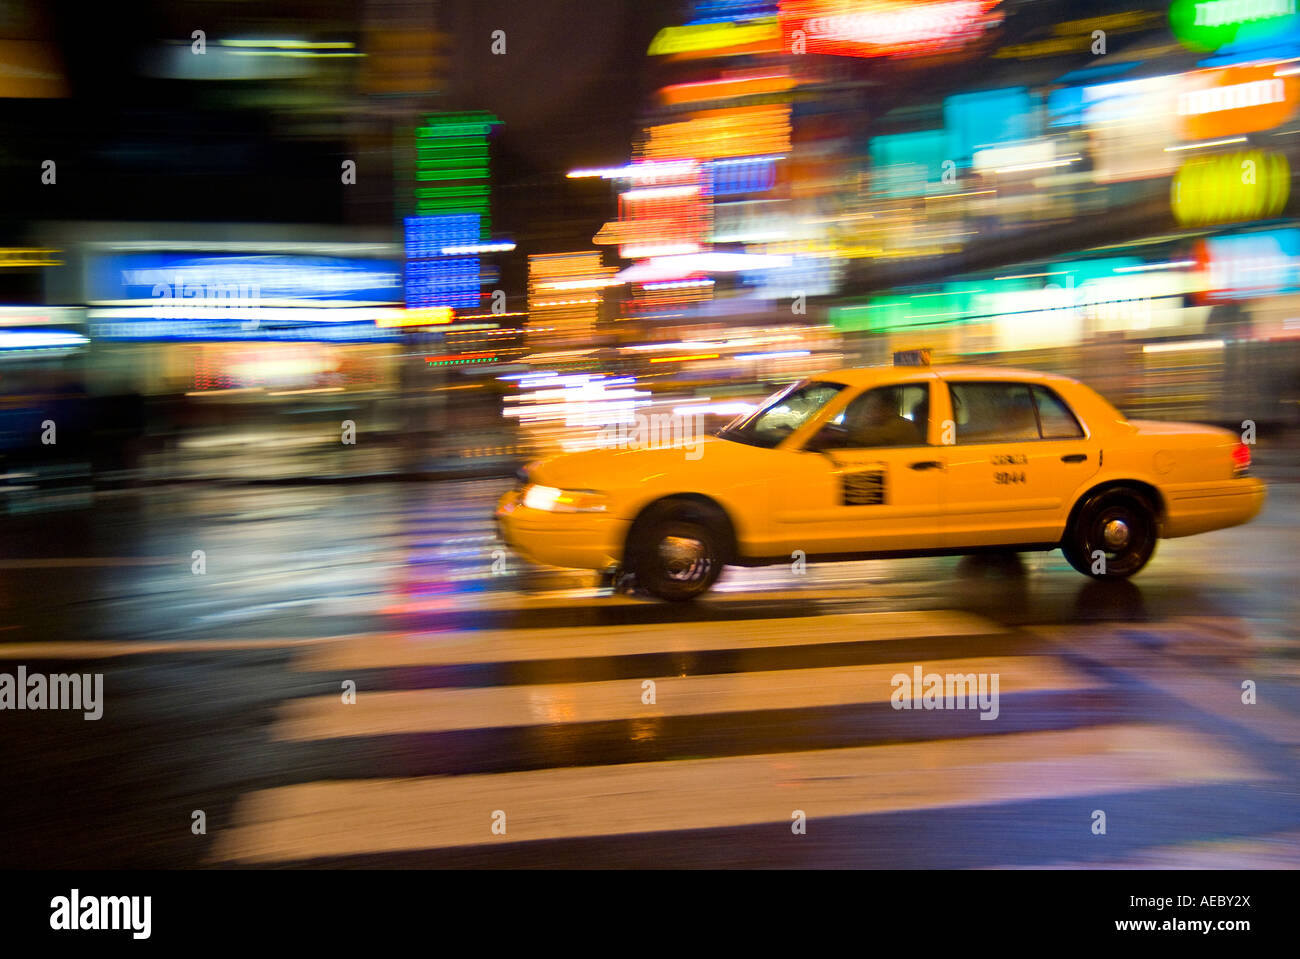 Taxi Cab, New York City At Night With Motion Blur And Bright Lights, Times Square, New York City, USA Stock Photo